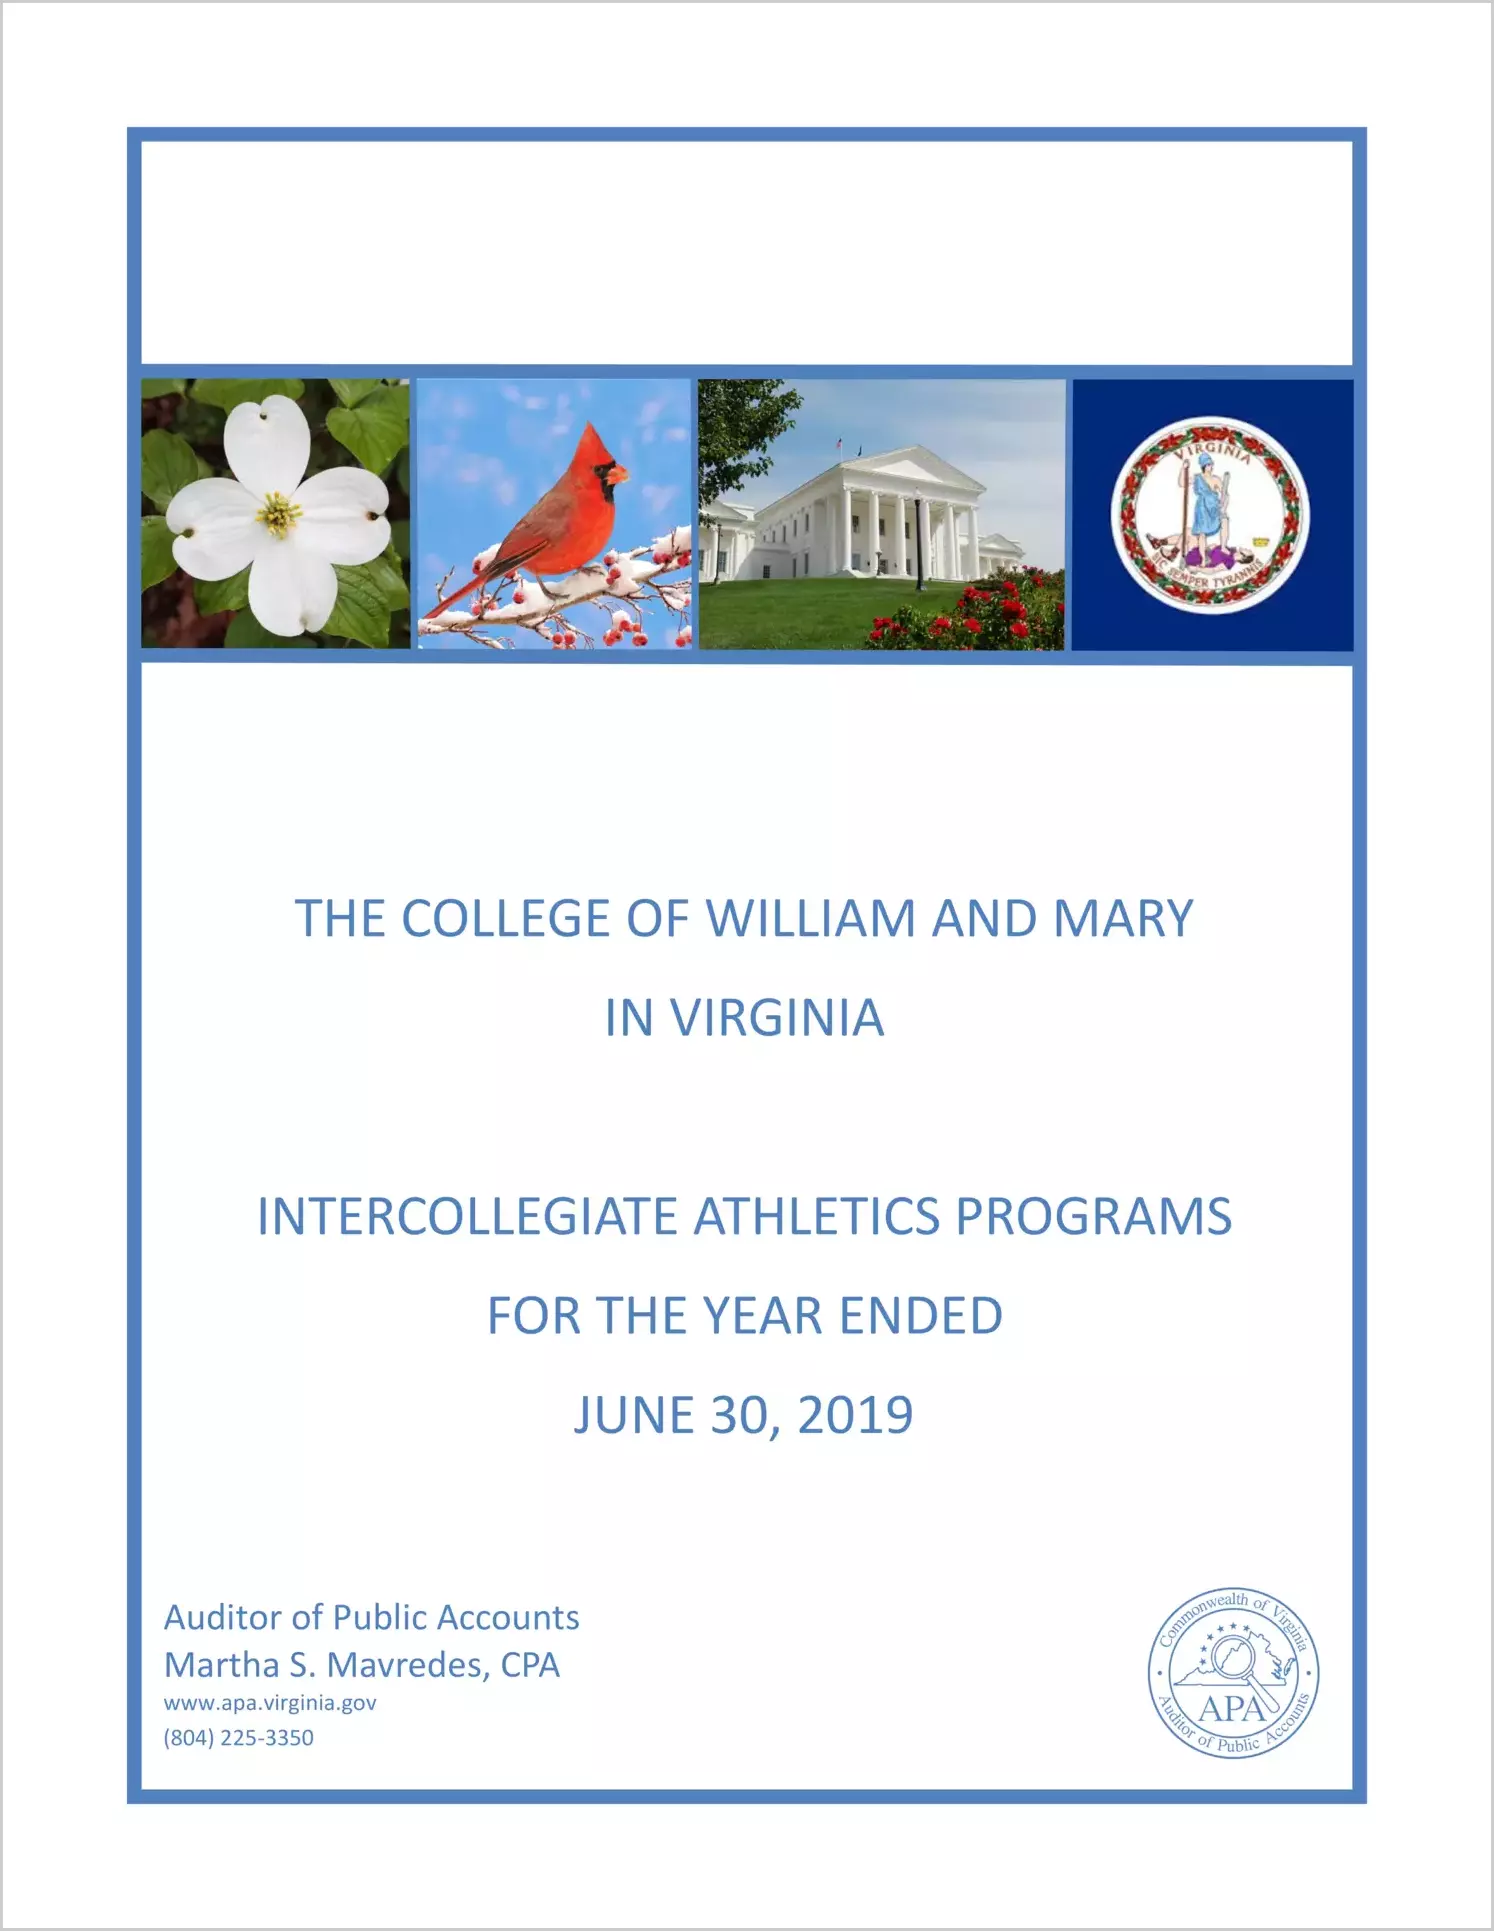 The College of William and Mary in Virginia Intercollegiate Athletics Programs for the year ended June 30, 2019